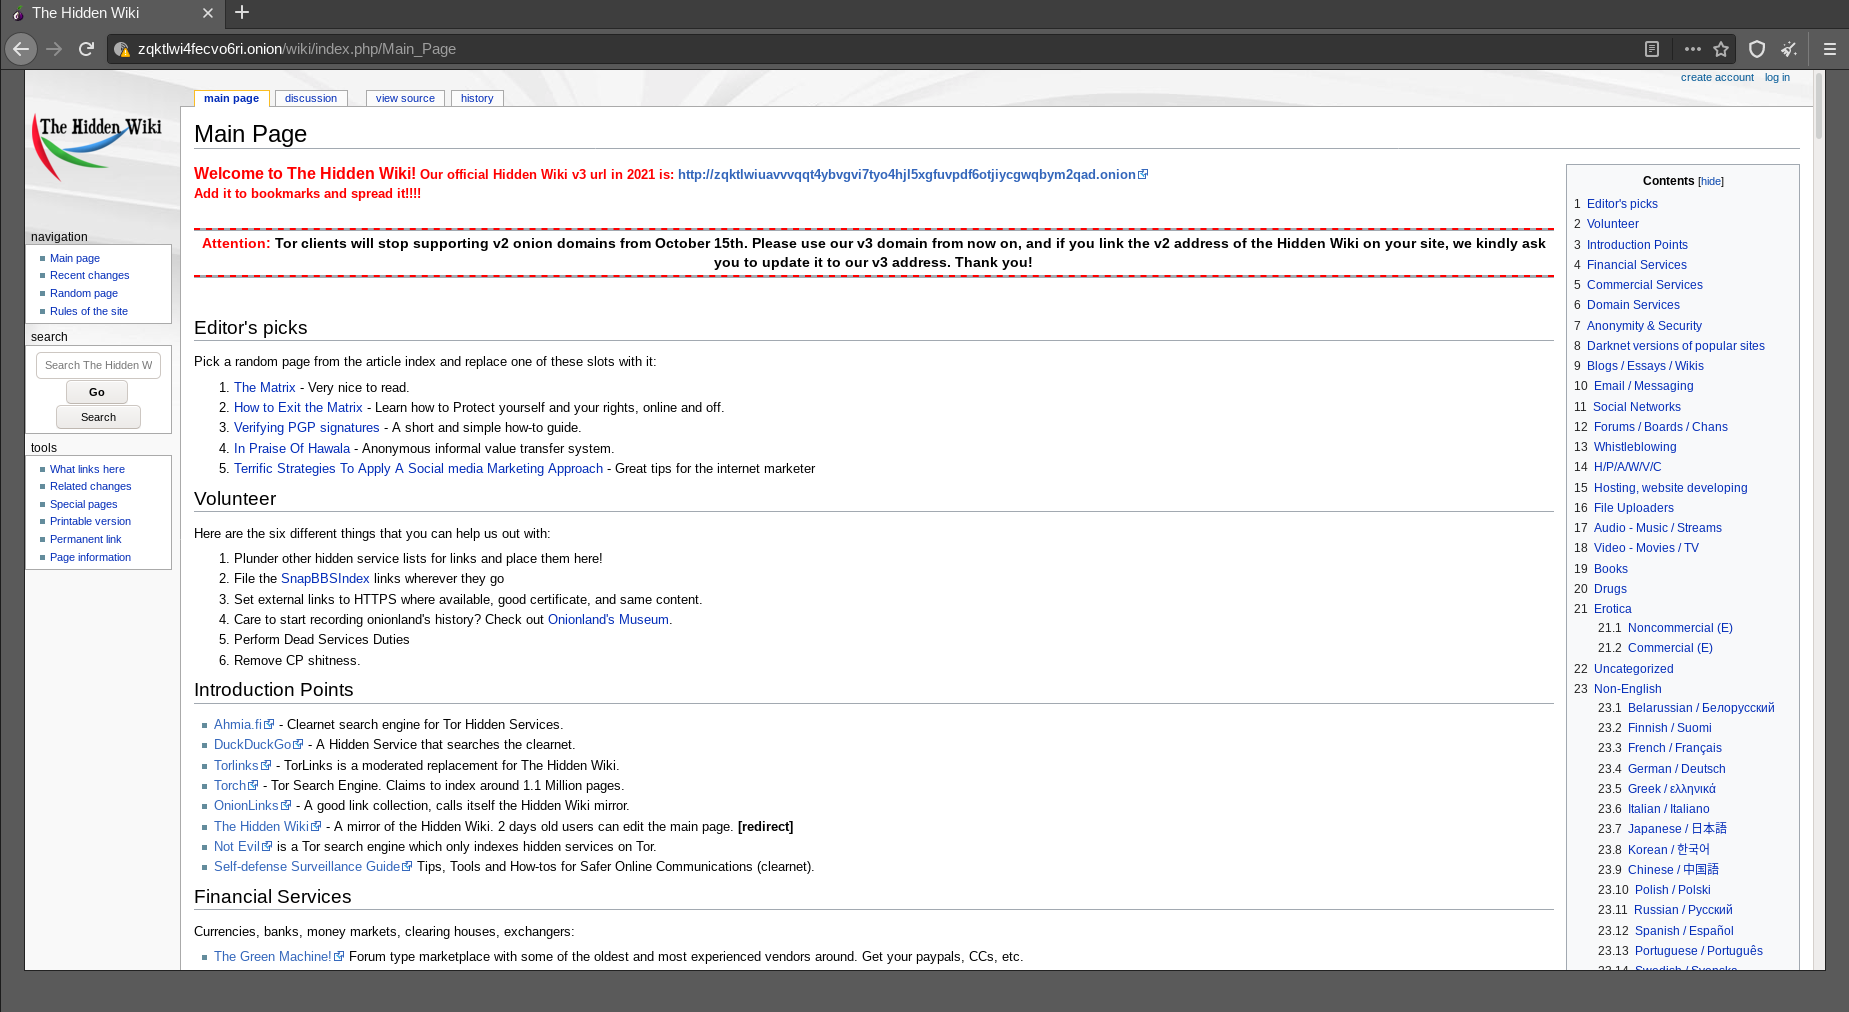 The main page of the dark web version of Wikipedia known as The Hidden Wiki.